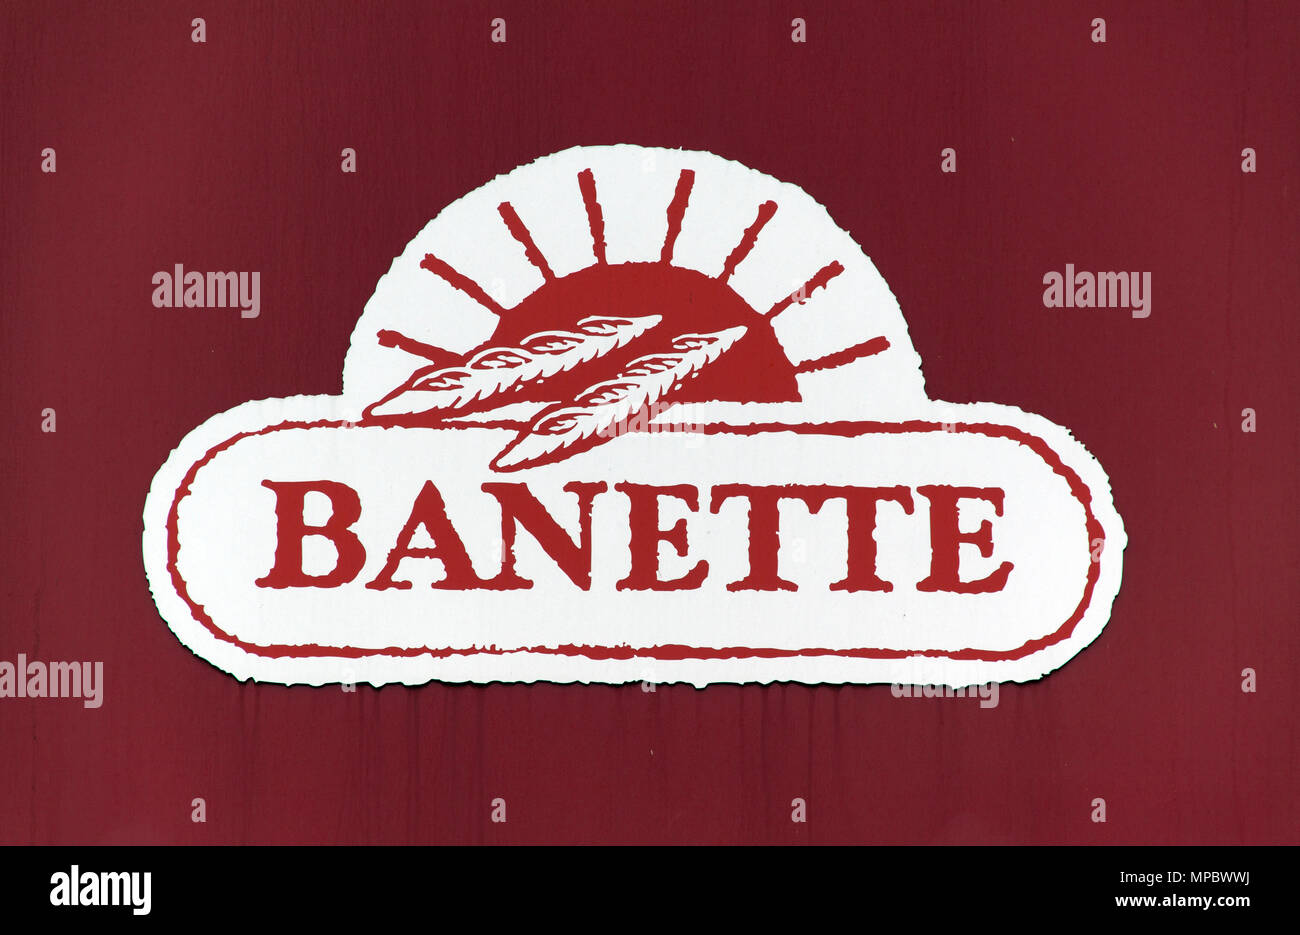 paris , France-september 15, 2015: sign of bannette, bannette is a chain of French bakeries, this one is located in Arles France Stock Photo